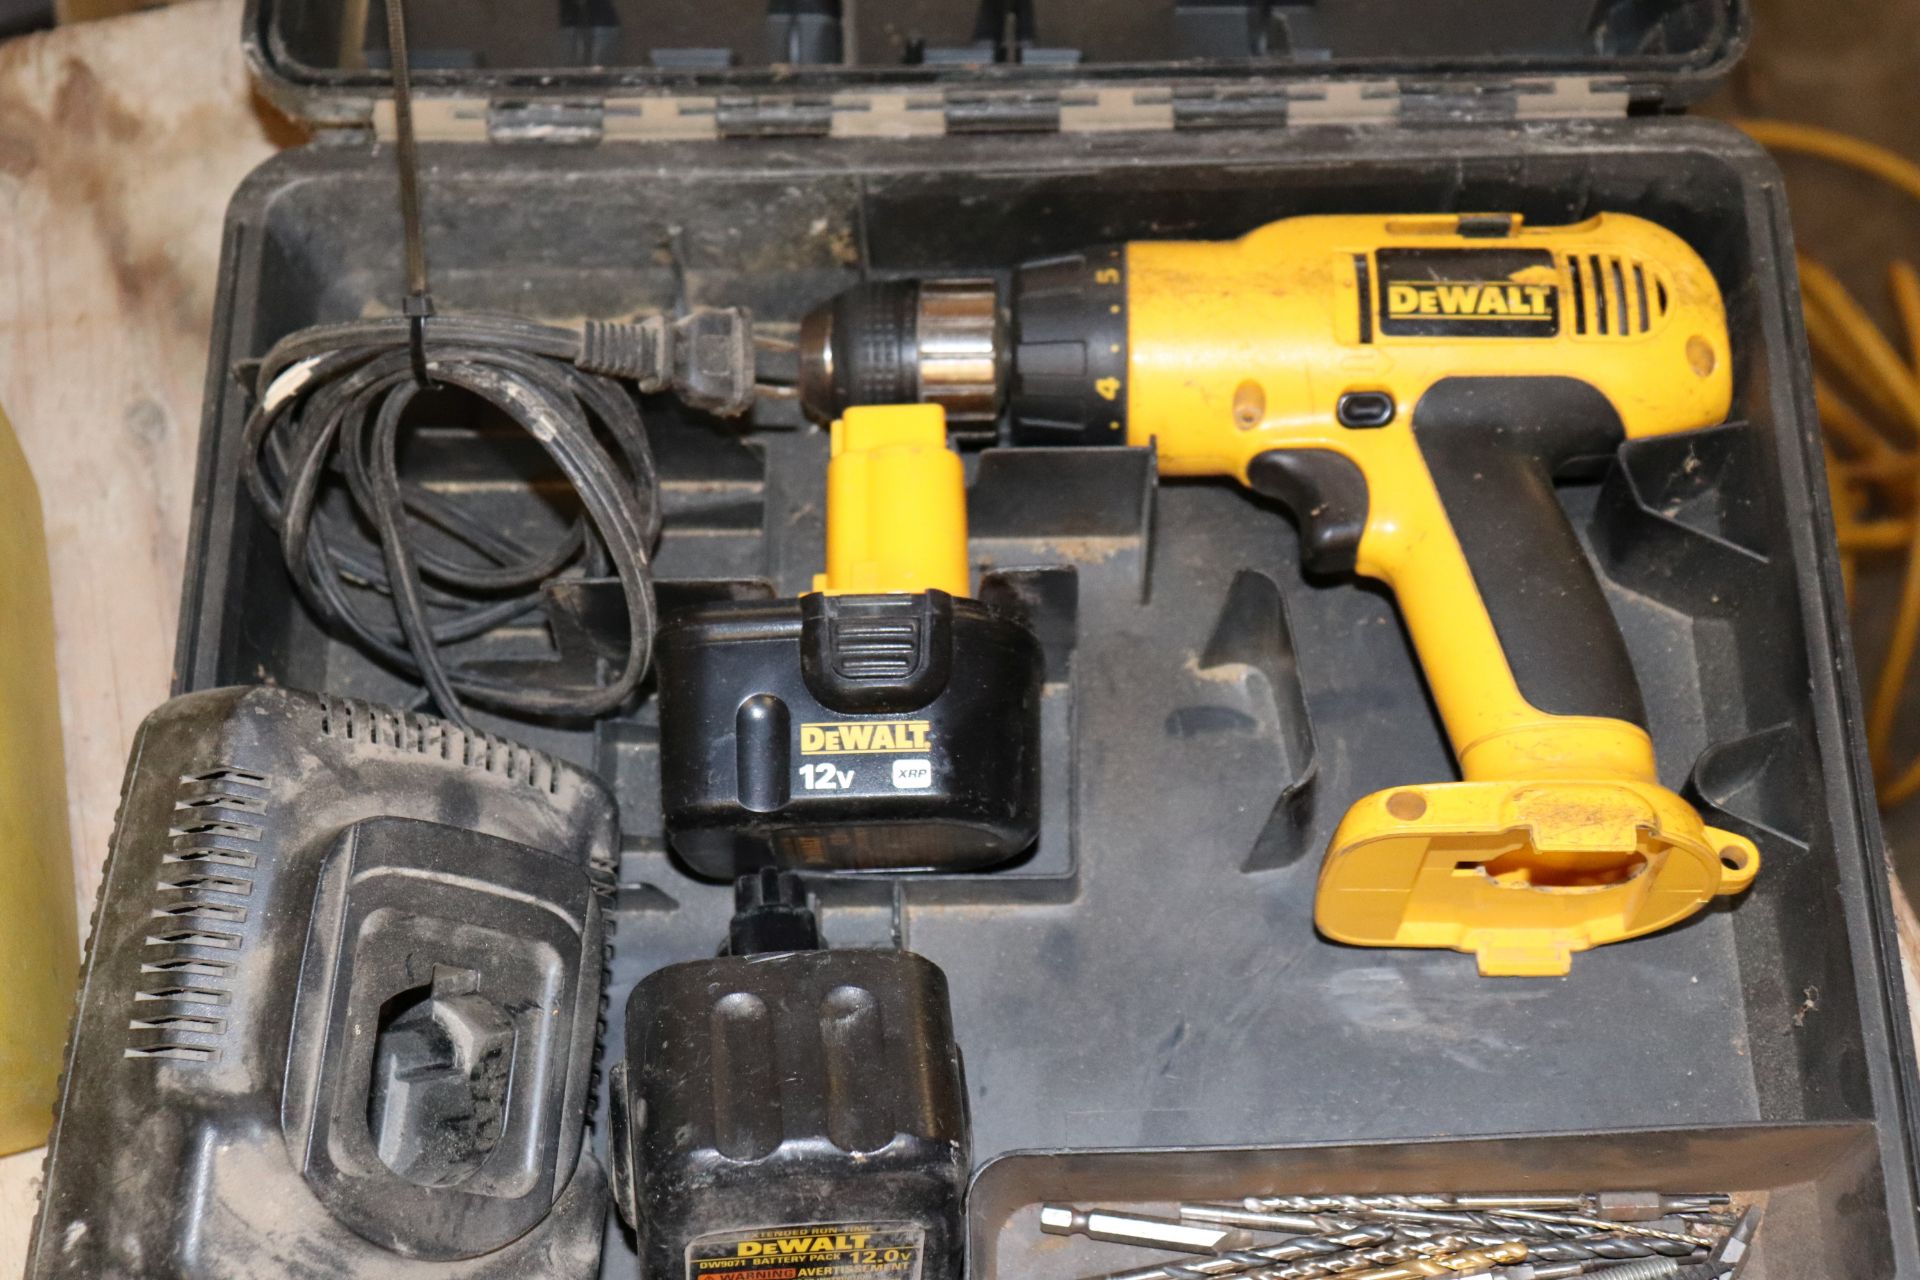 Dewalt battery powered drill, model DW972, with battery, extra battery, charger and case